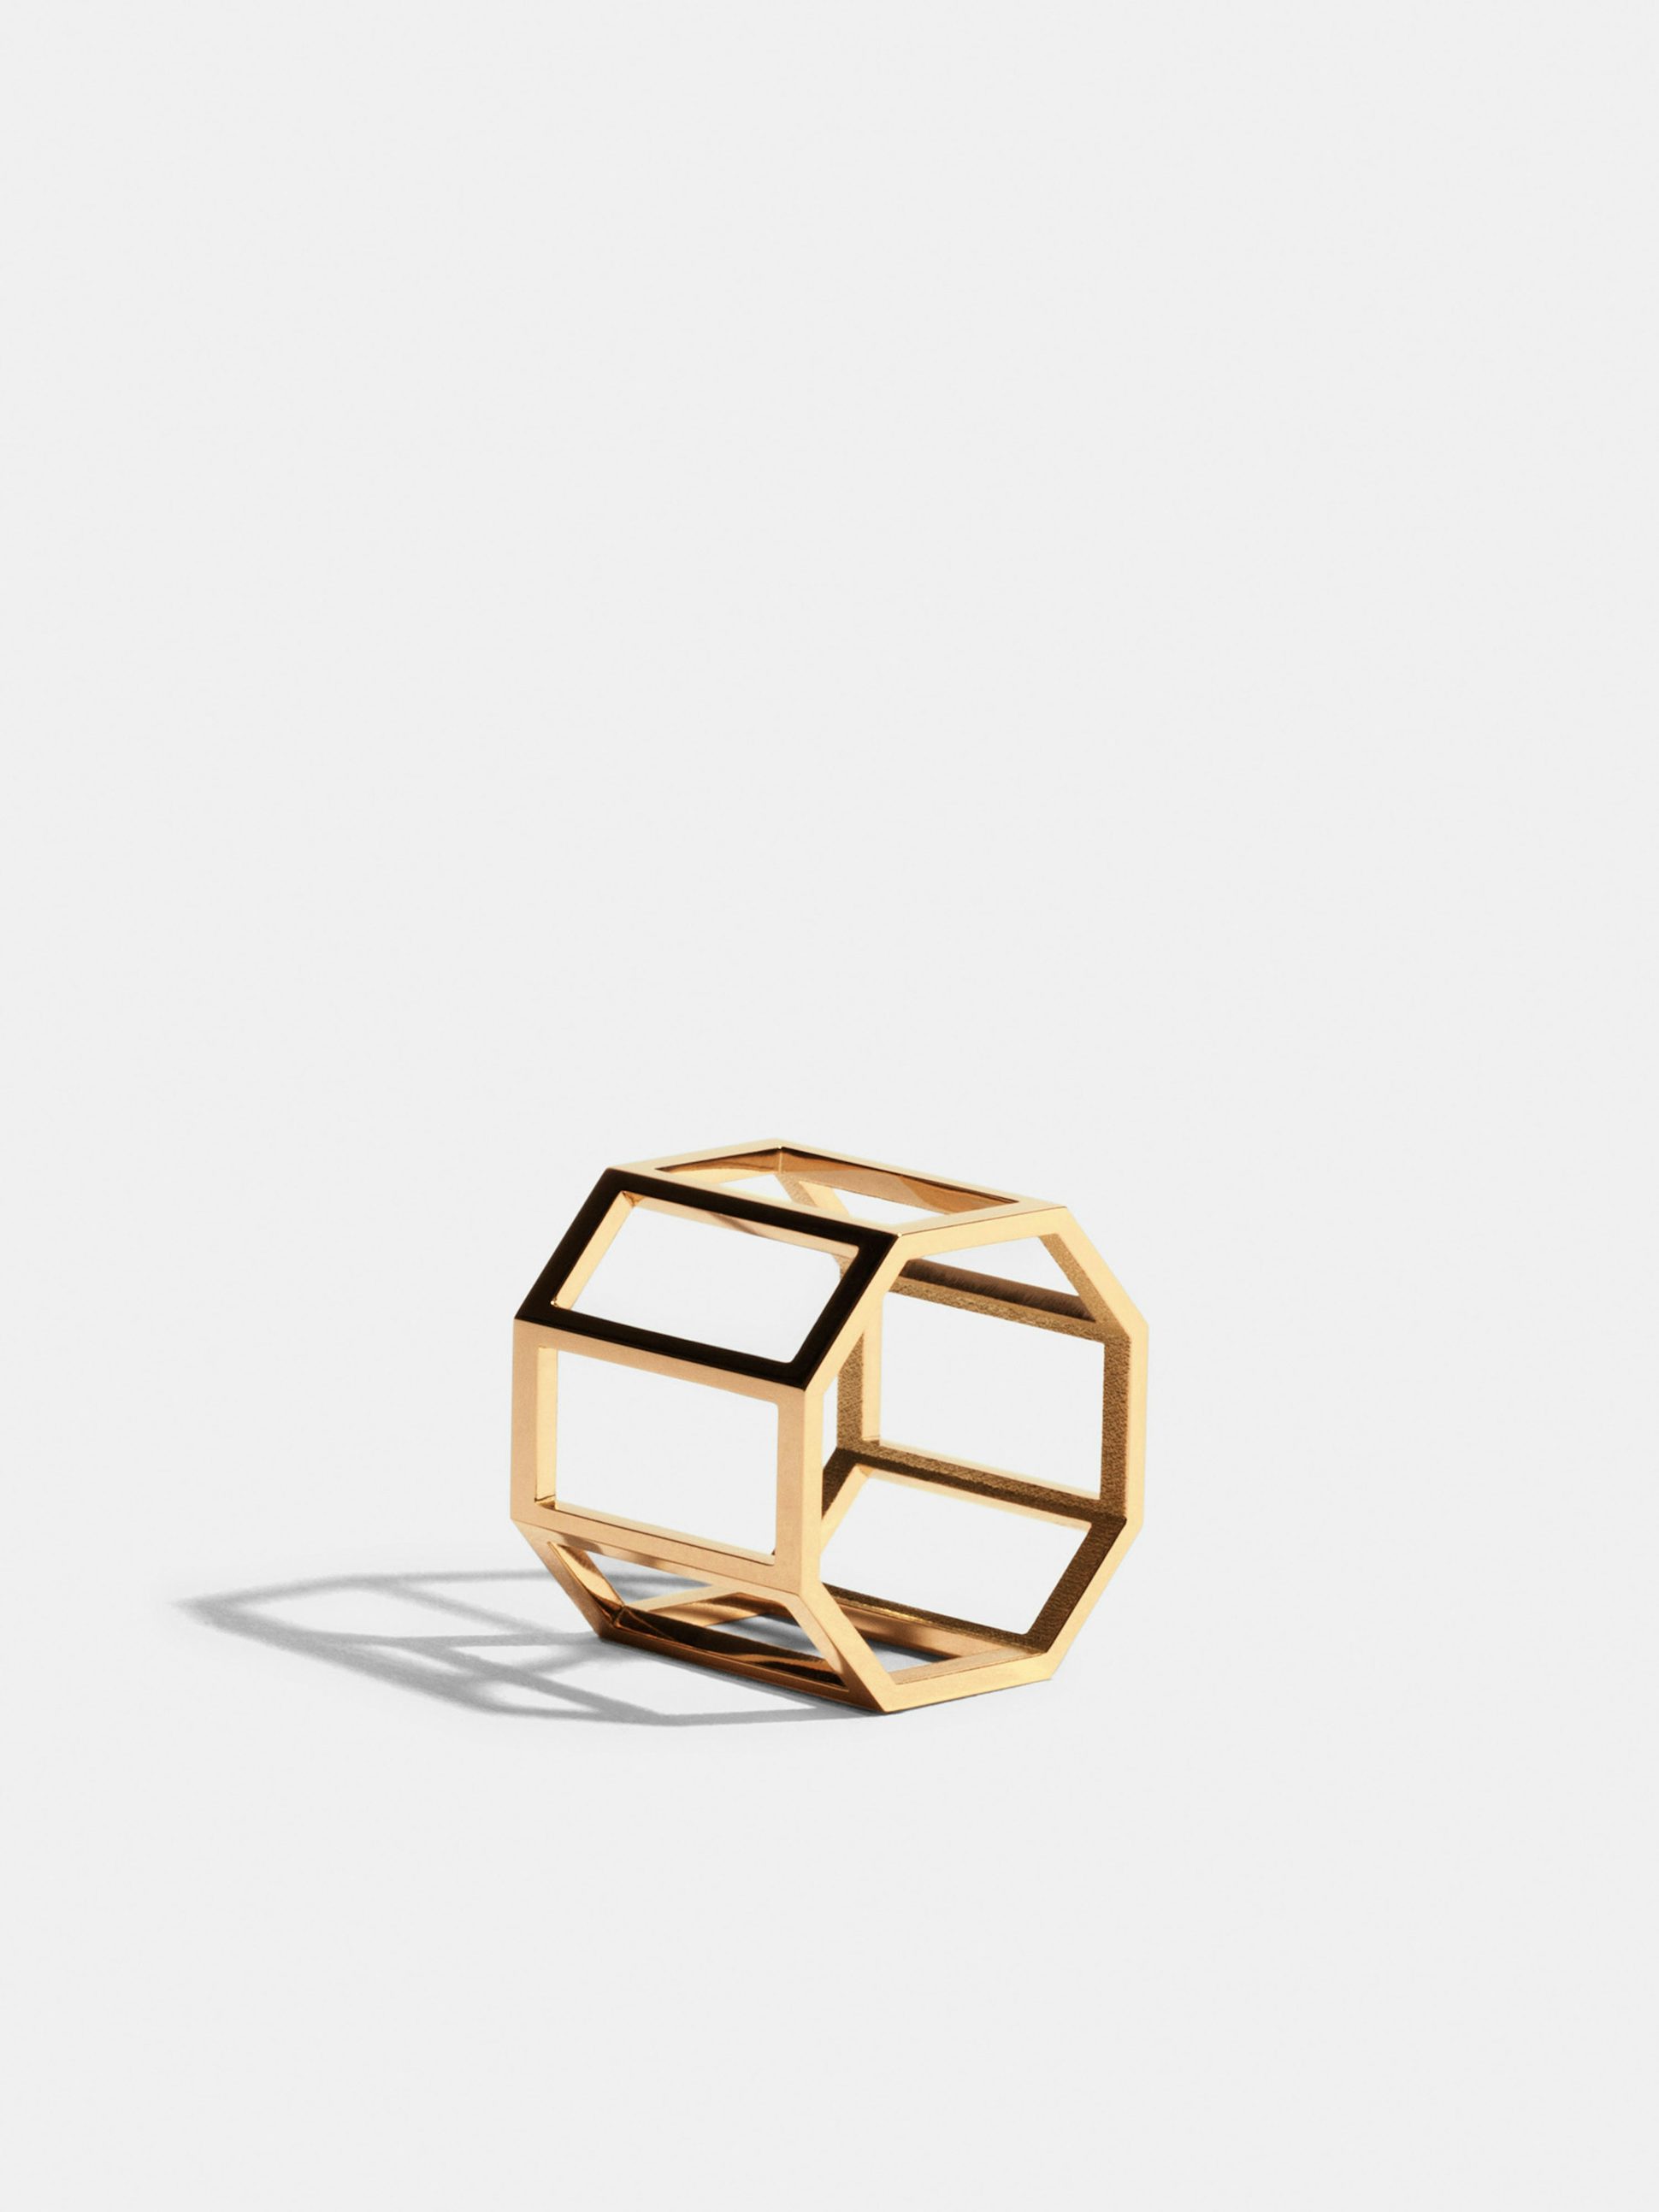 Octogone structured ring in 18k Fairmined ethical yellow gold (17mm)